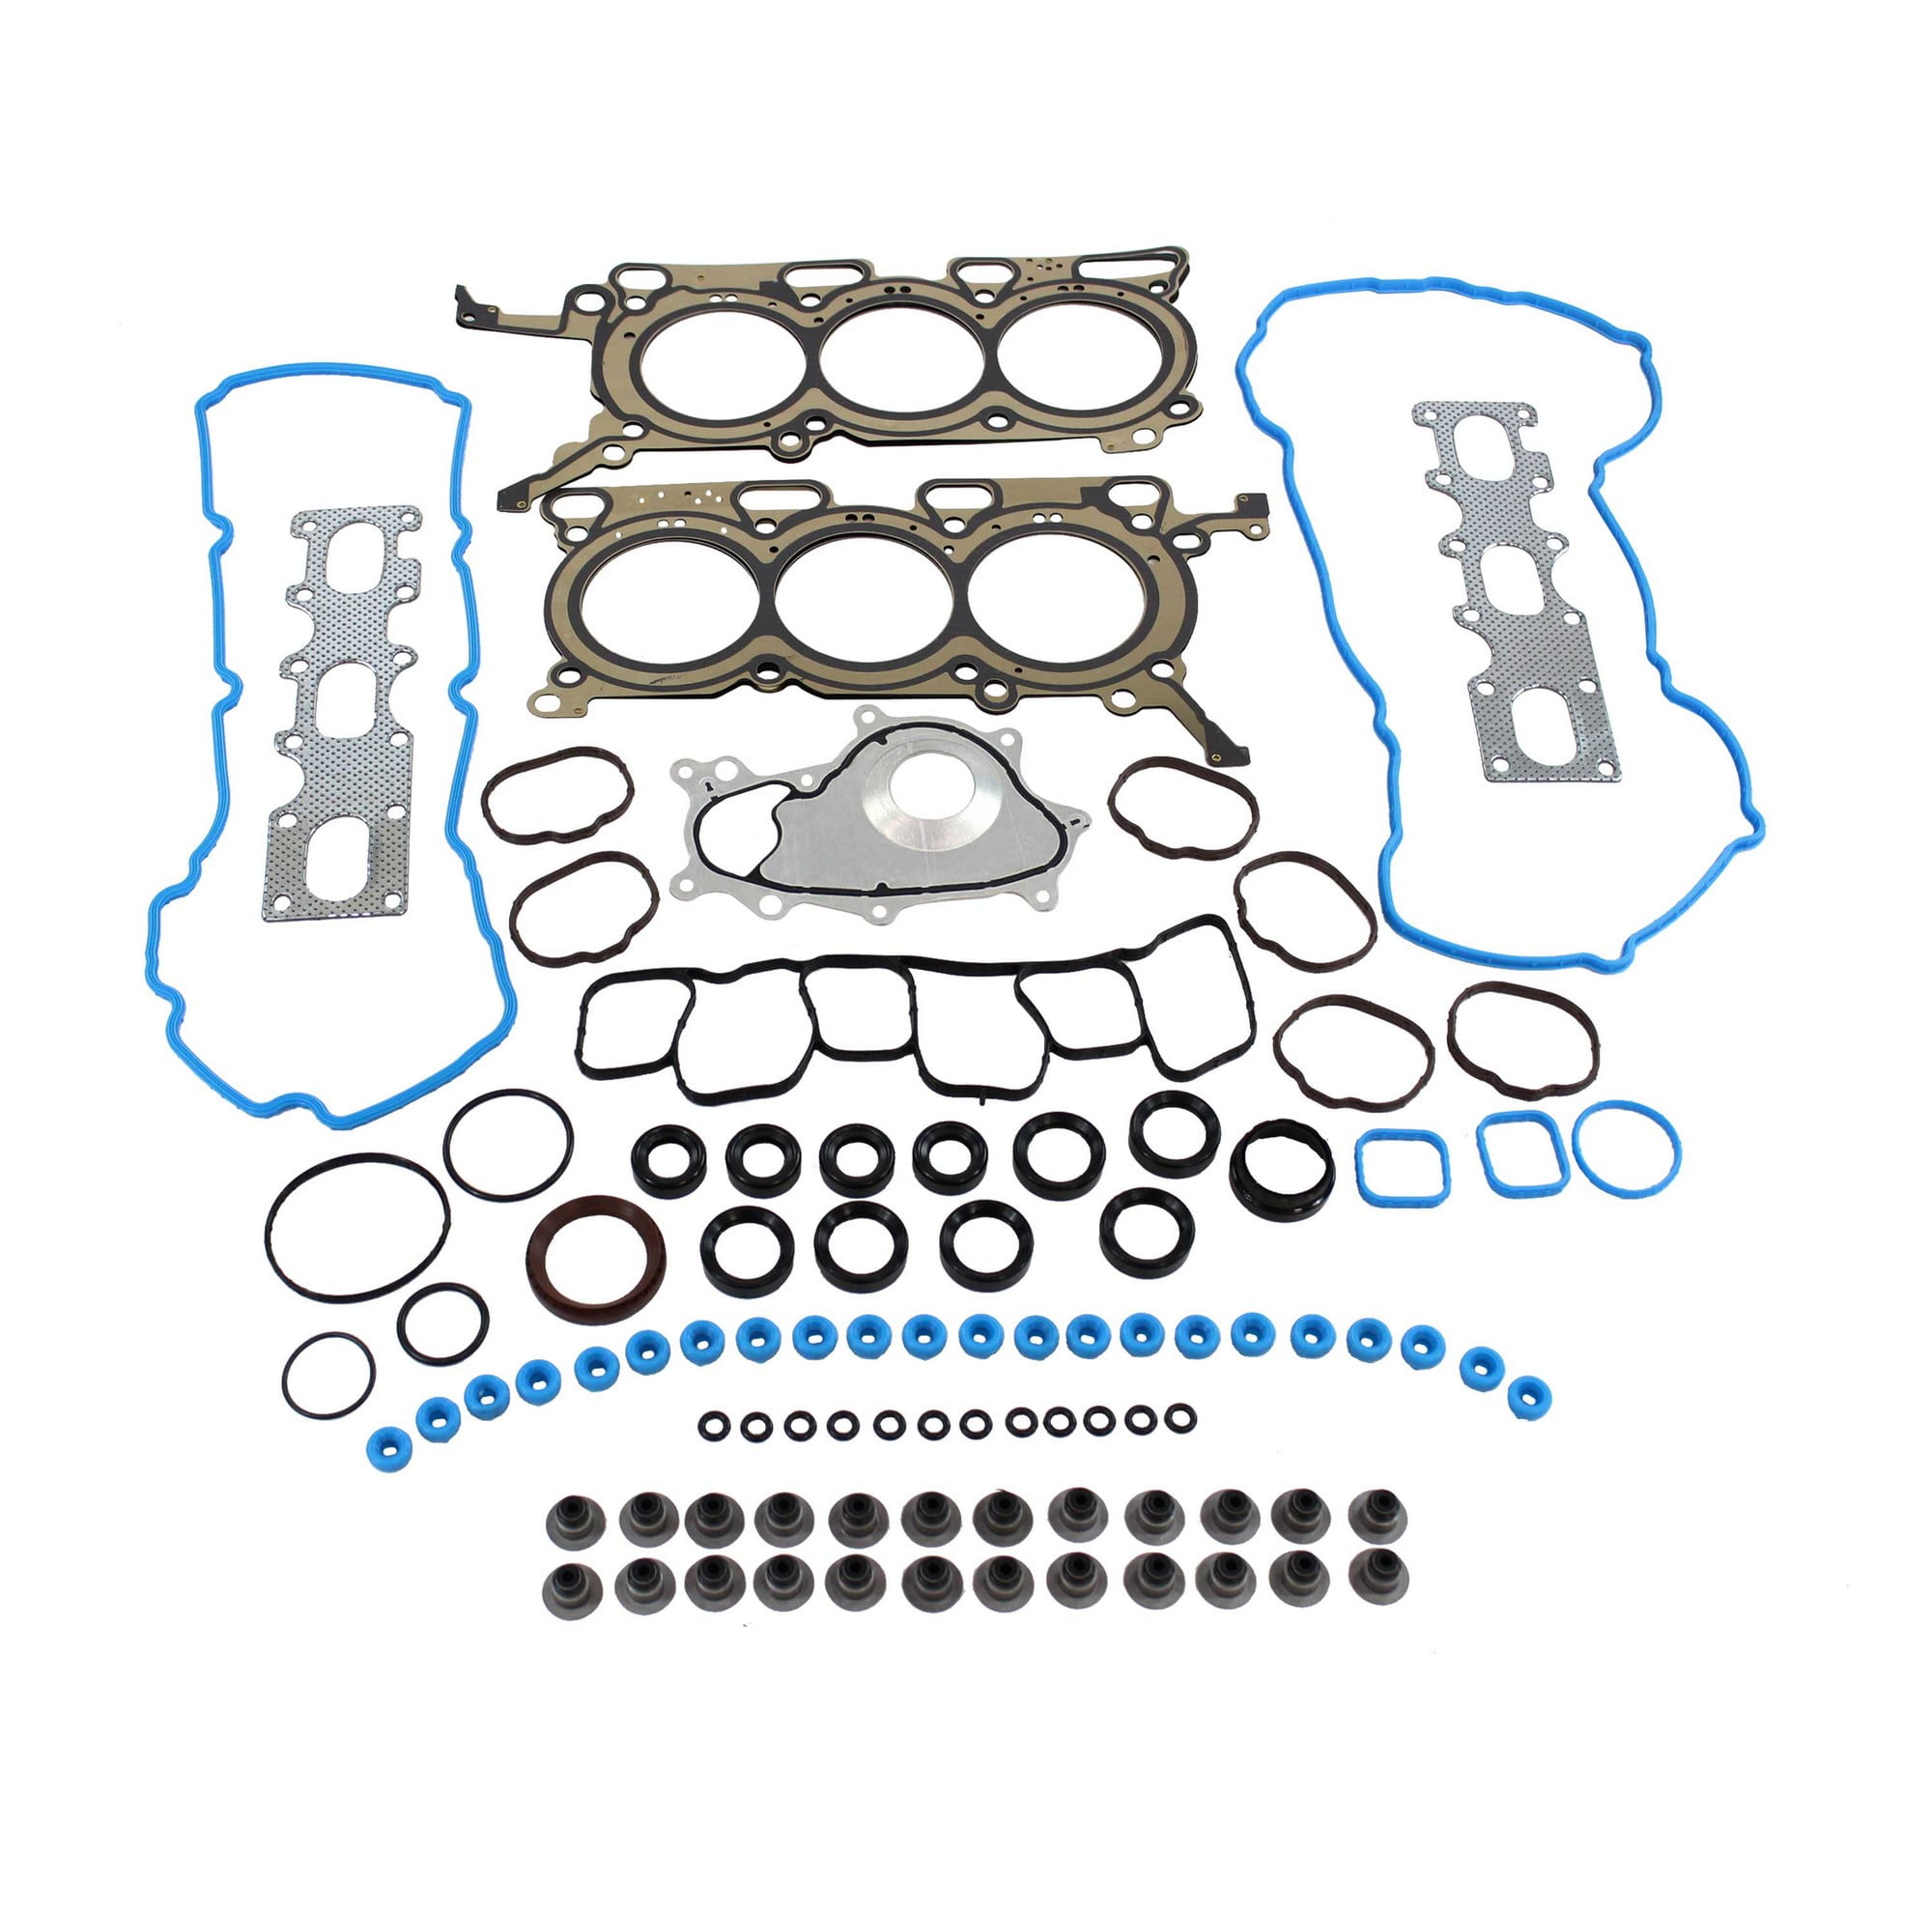 MKC 2.3L L4 DOHC Turbocharged DNJ HG4318 Head Gasket For 15 Ford Lincoln/Mustang 